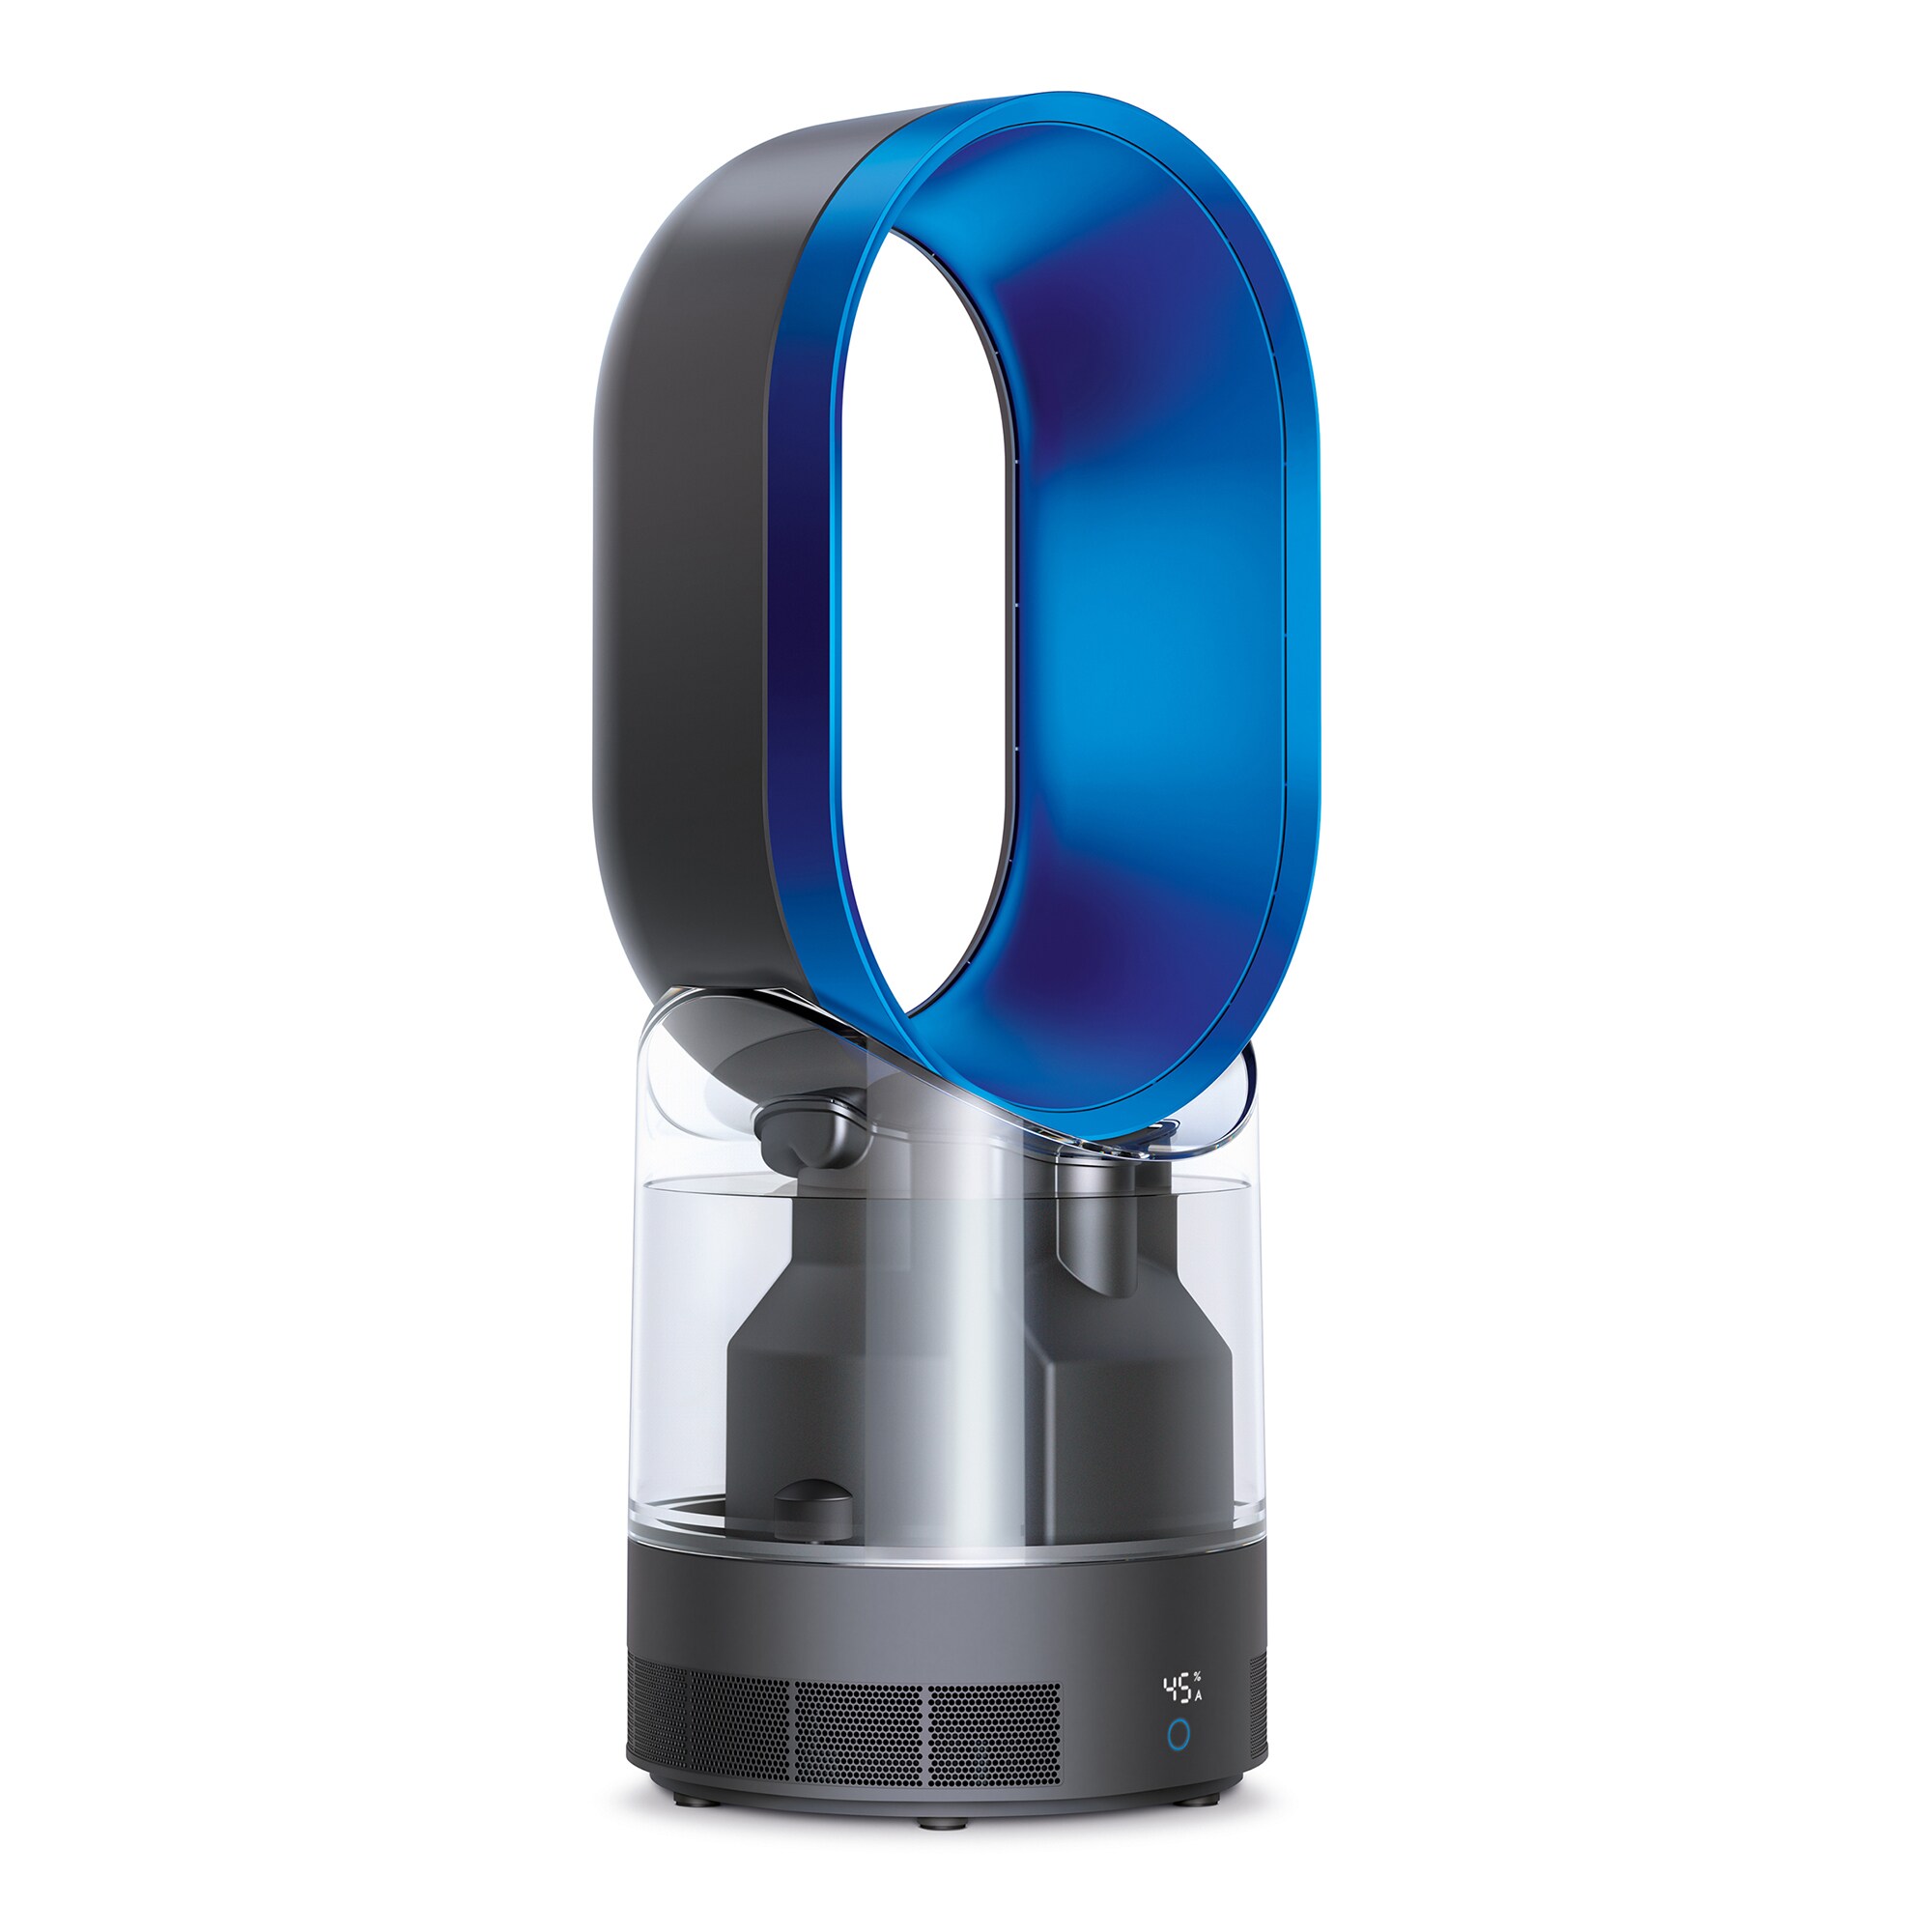 Dyson humidifier 0.8-Gallon Tower Ultrasonic Humidifier (For Rooms 